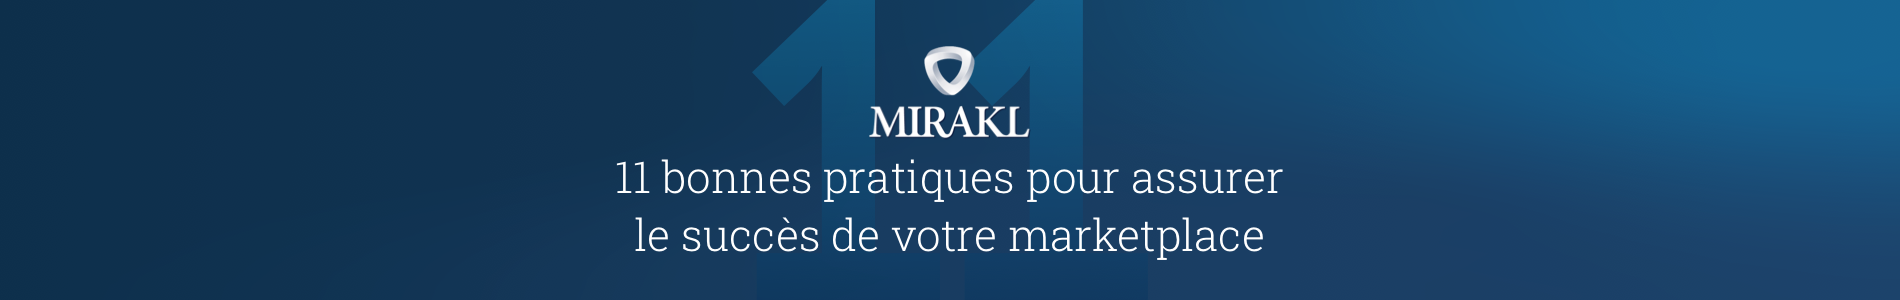 Best Practices eBook Launch - Banner French (1900x300)